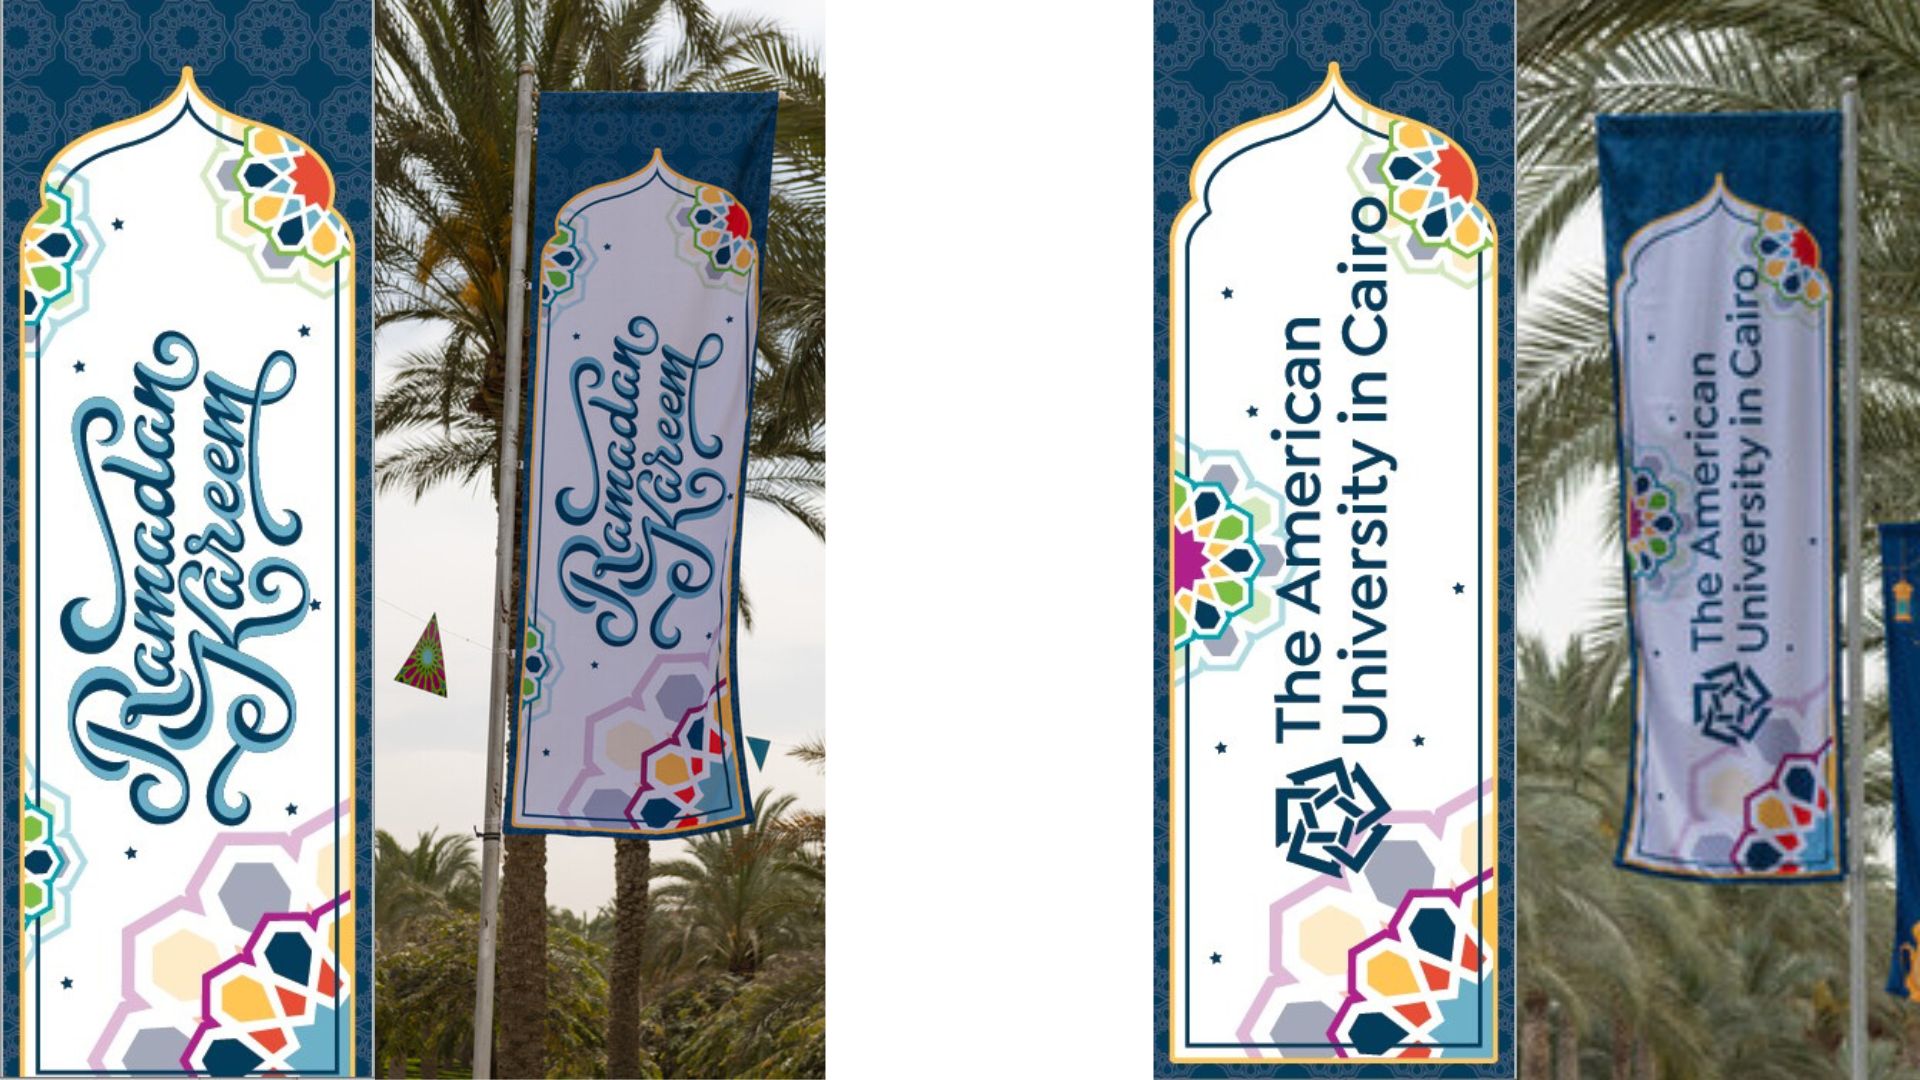 Two photos of Youssef Anwar's banner designs and banners on campus. On the left is a blue and white banner with the words "Ramadan Kareem" with orange, yellow, blue and green geometric designs. On the right, another banner design with the words "American University in Cairo" with the same geometric designs and color scheme. 